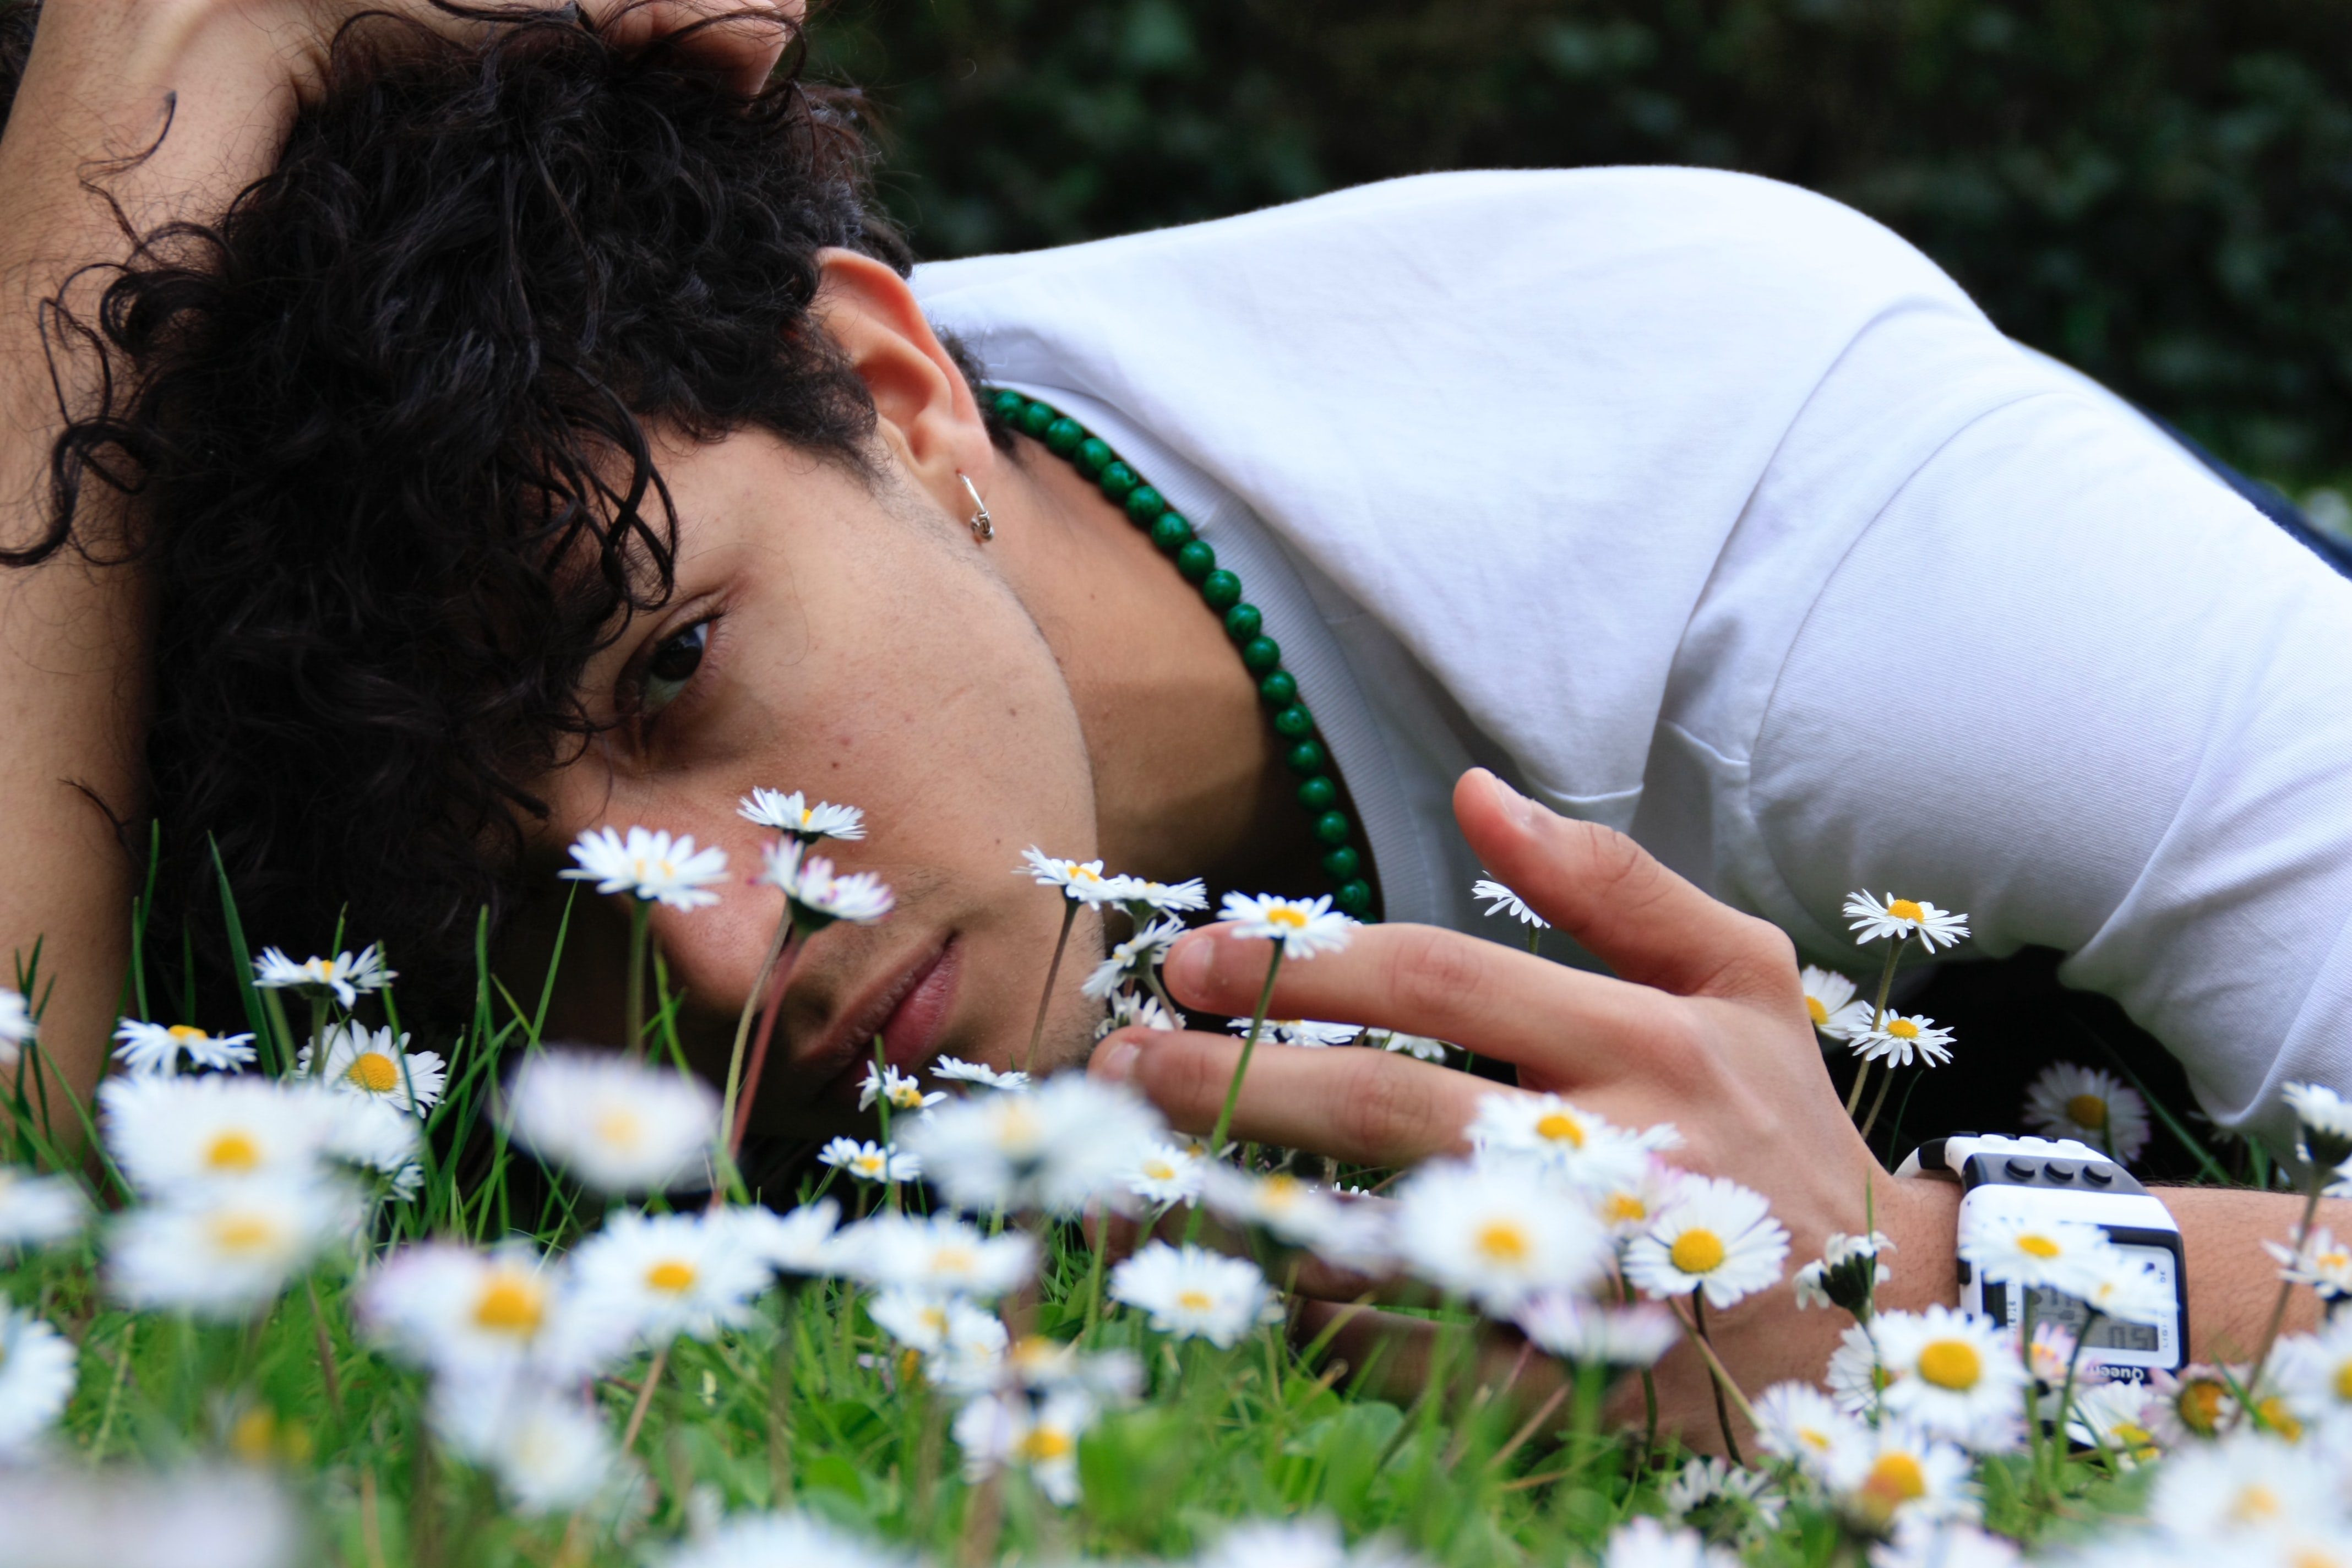 A young man laying in the grass with his face to the camera. There are small white flowers among the green grass blades. 